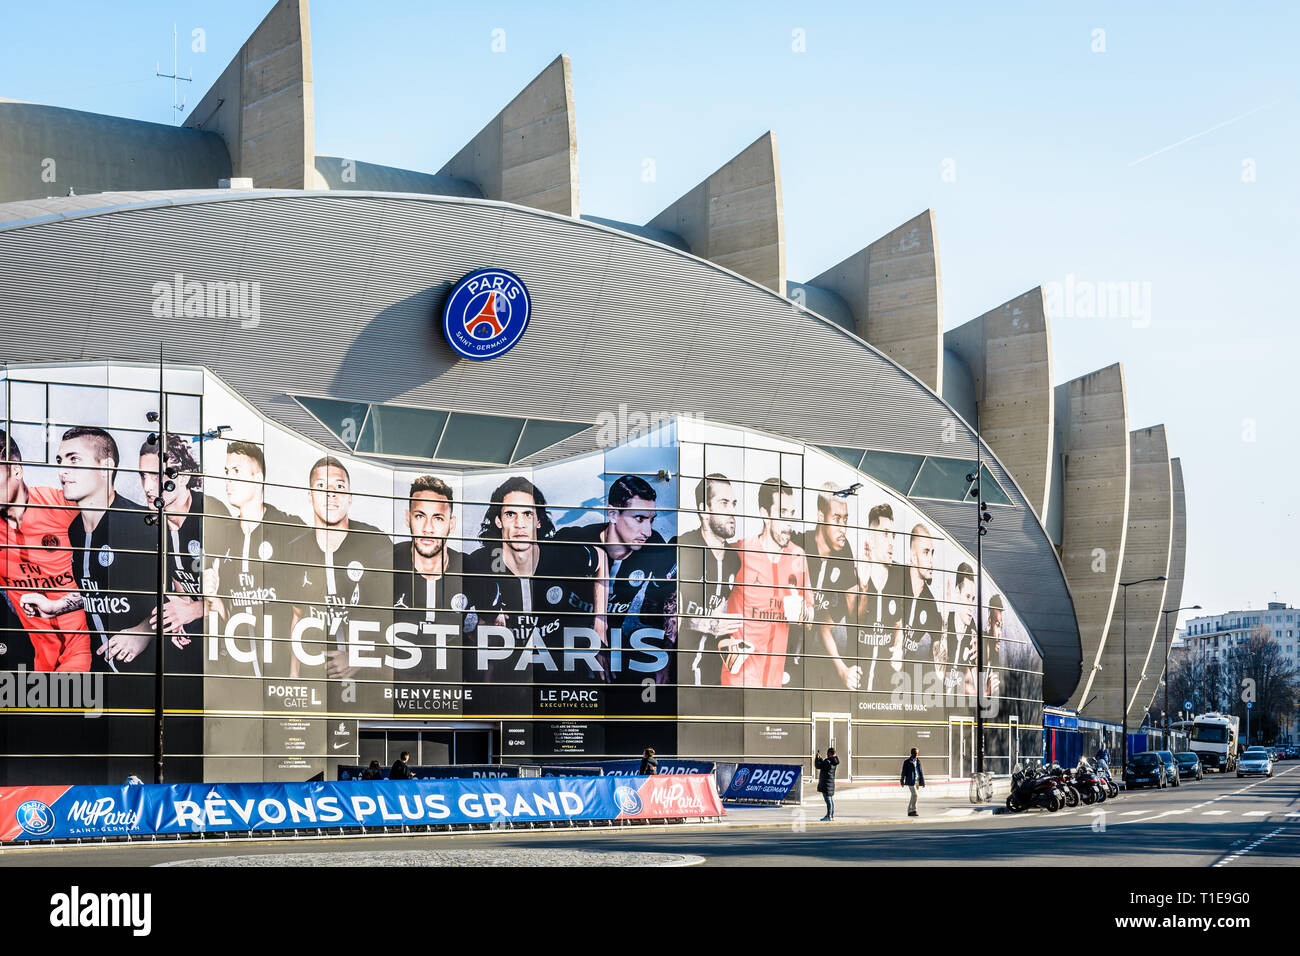 Main entrance of the Parc des Princes stadium in Paris, France, covered with a fresco of the players of the Paris Saint-Germain football club team. Stock Photo